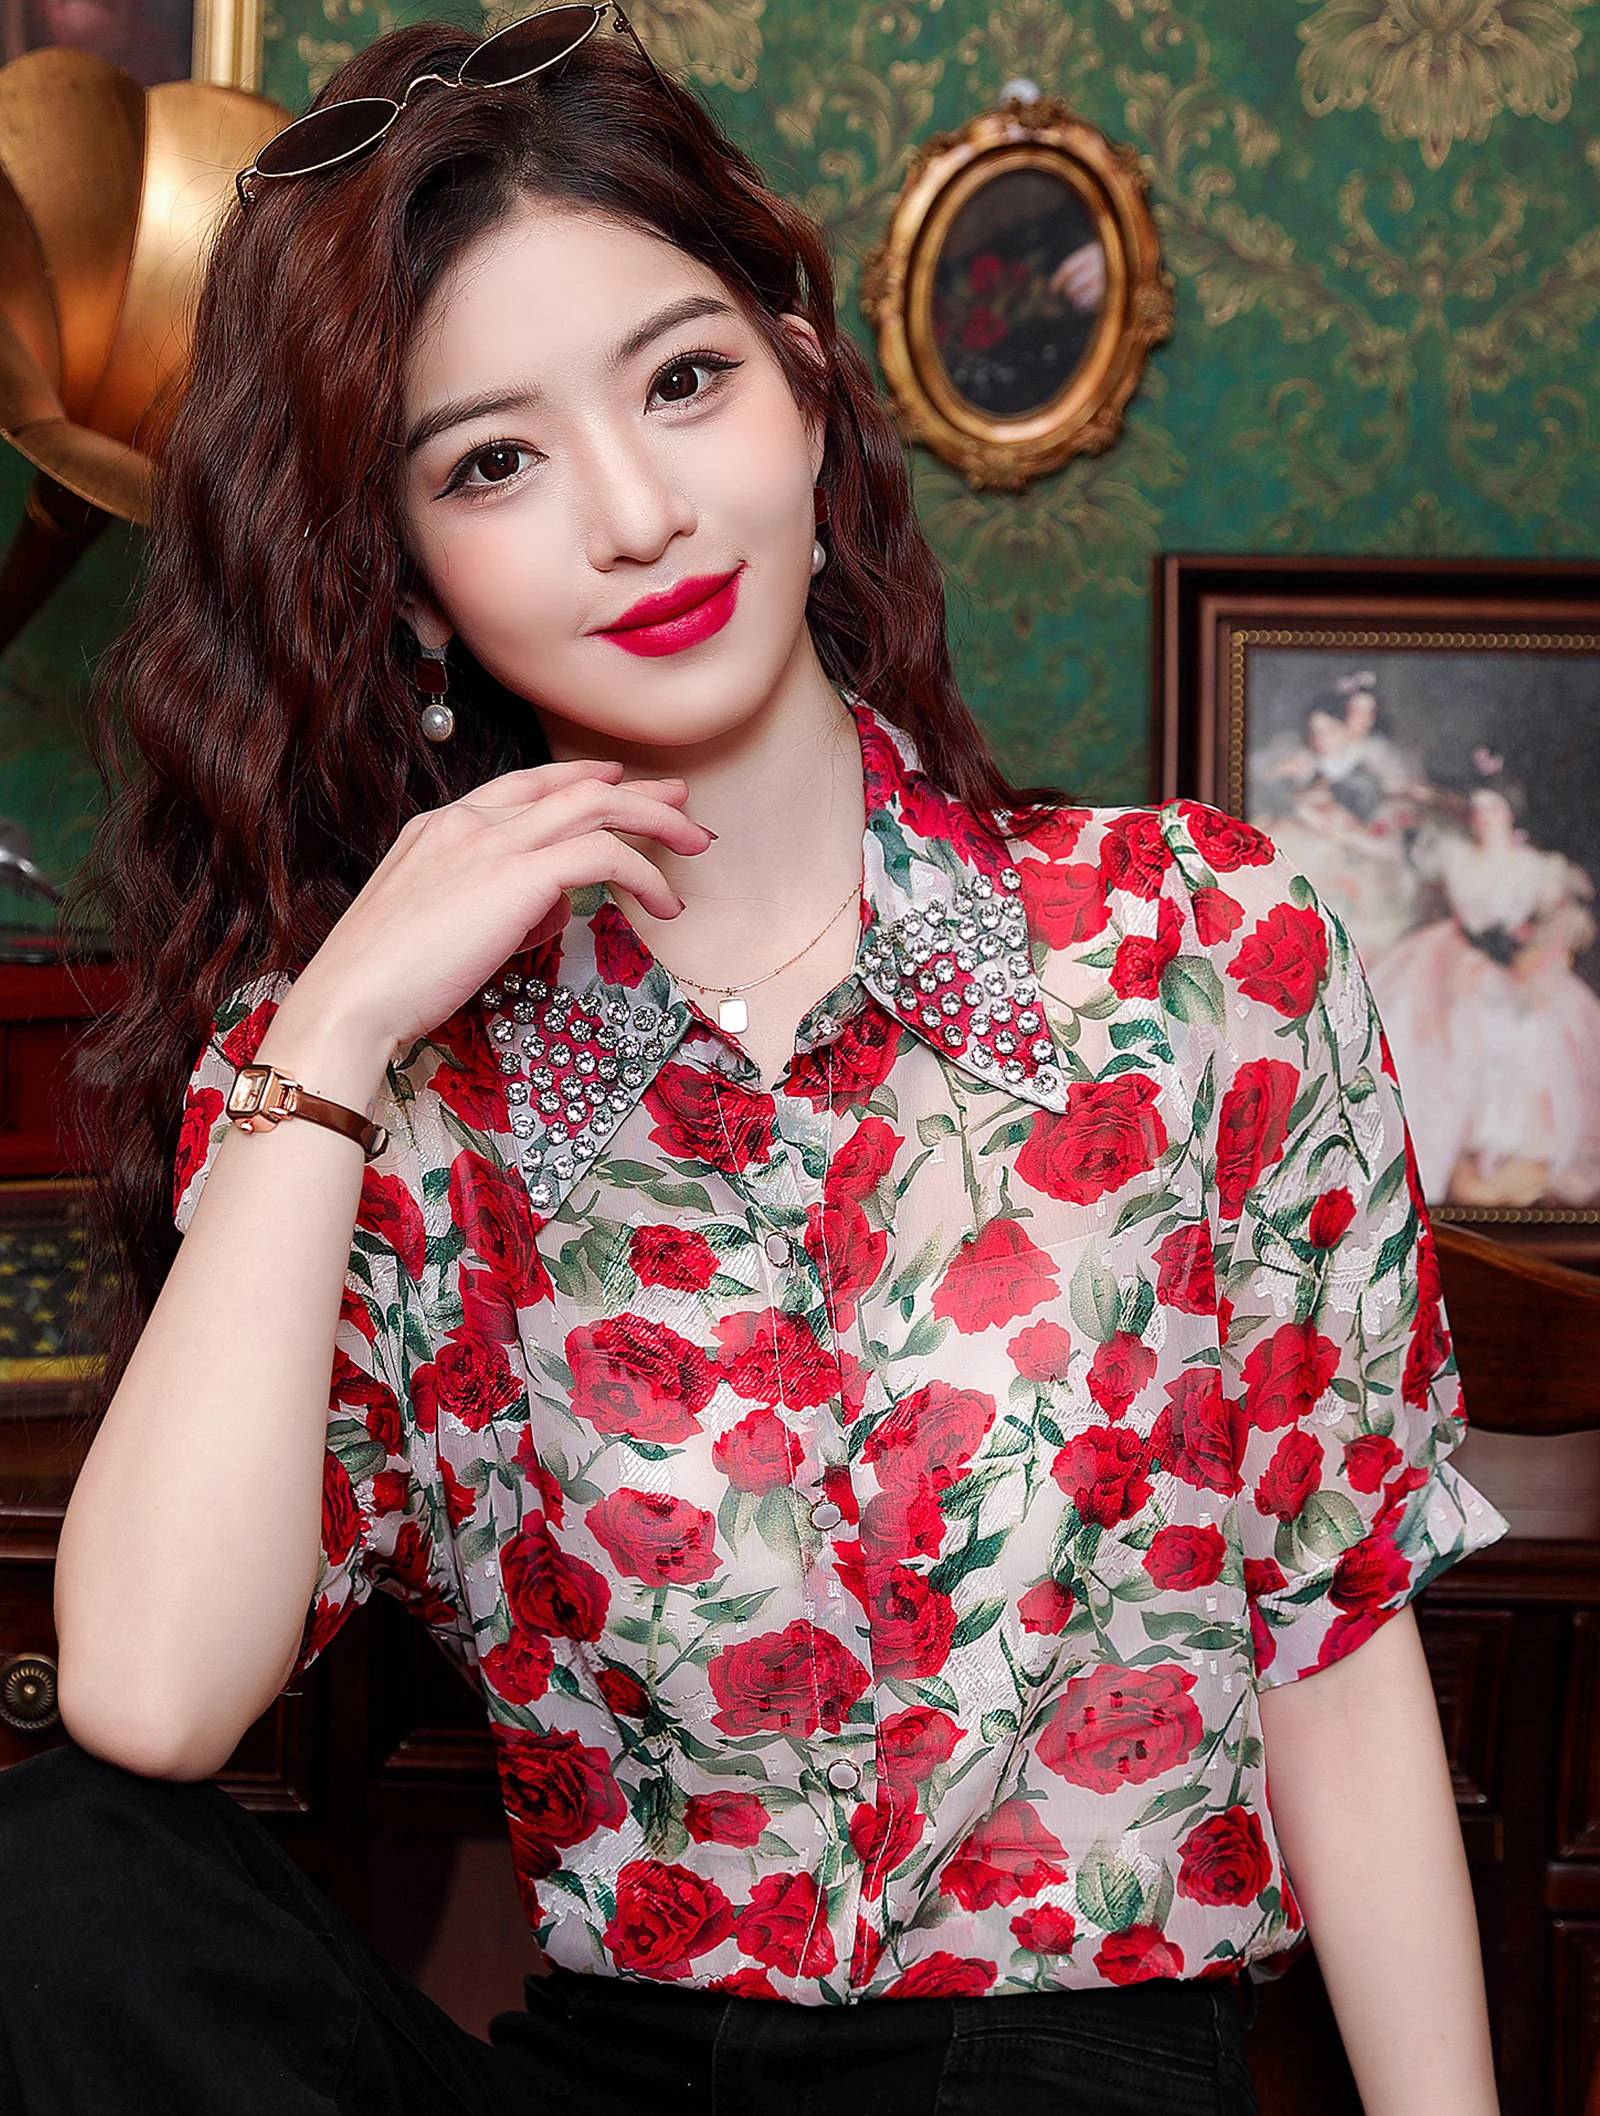 Women's Fashionable Red Floral Printed Chiffon Casual Shirt Blouse03